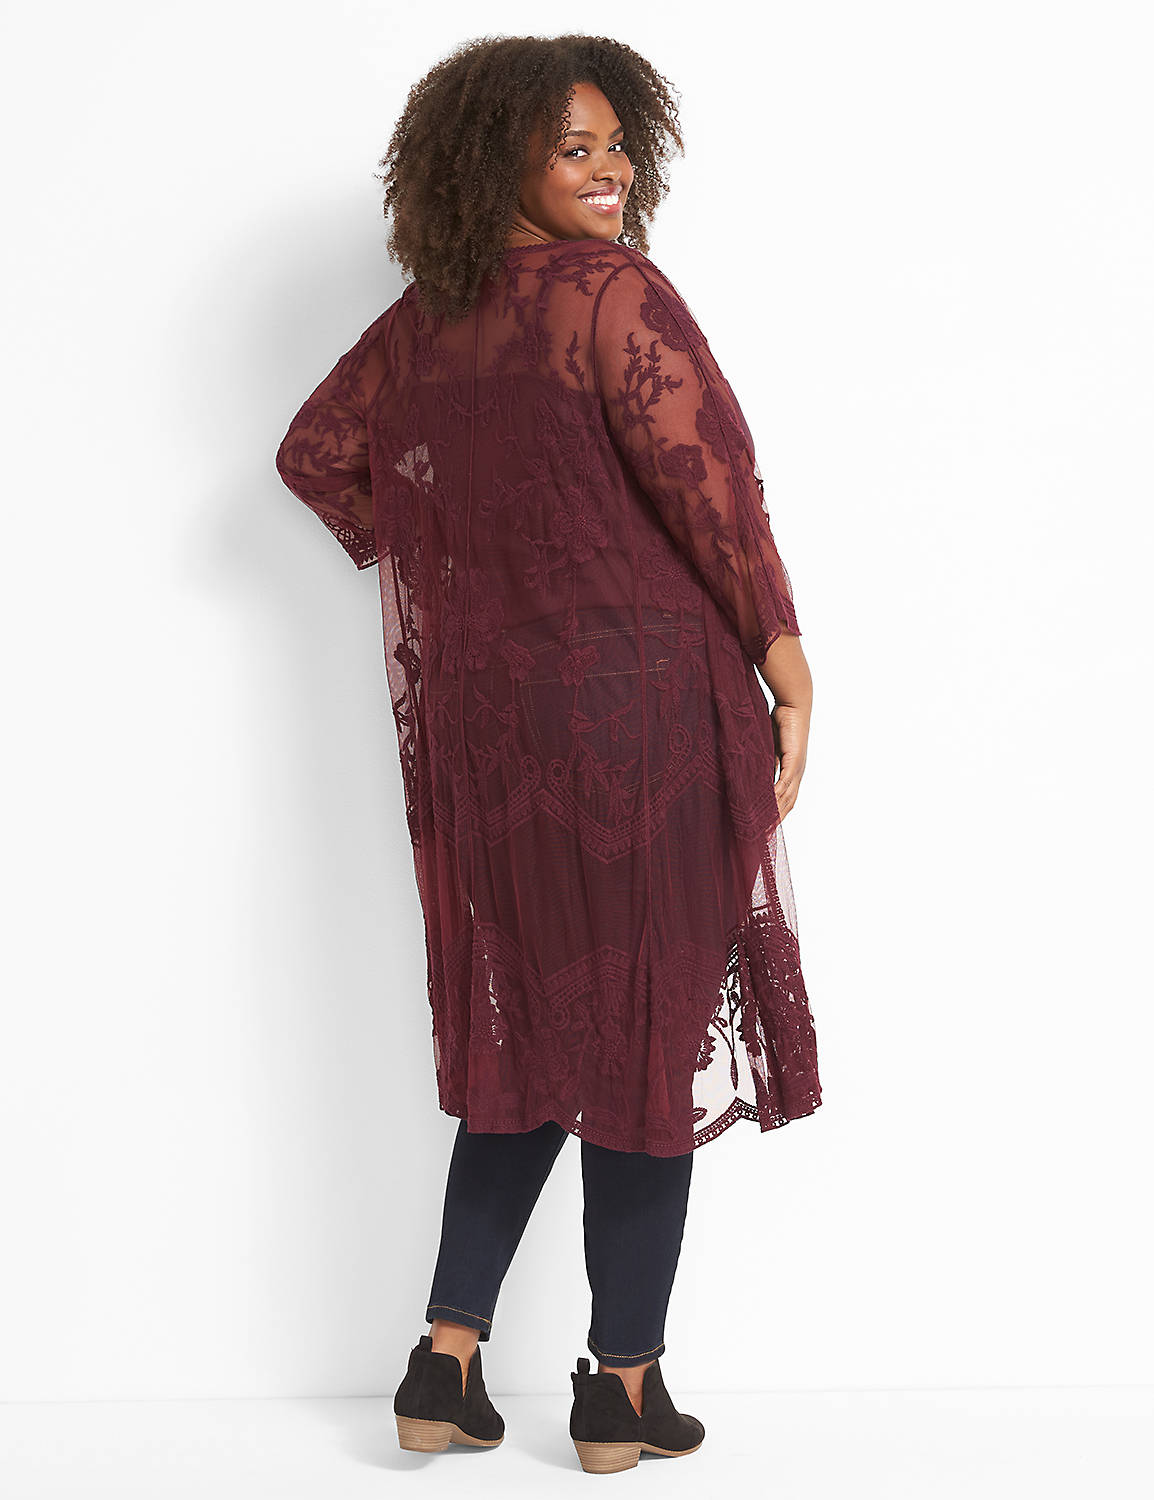 Medium-Sleeve Embroidered Mesh Duster Product Image 2